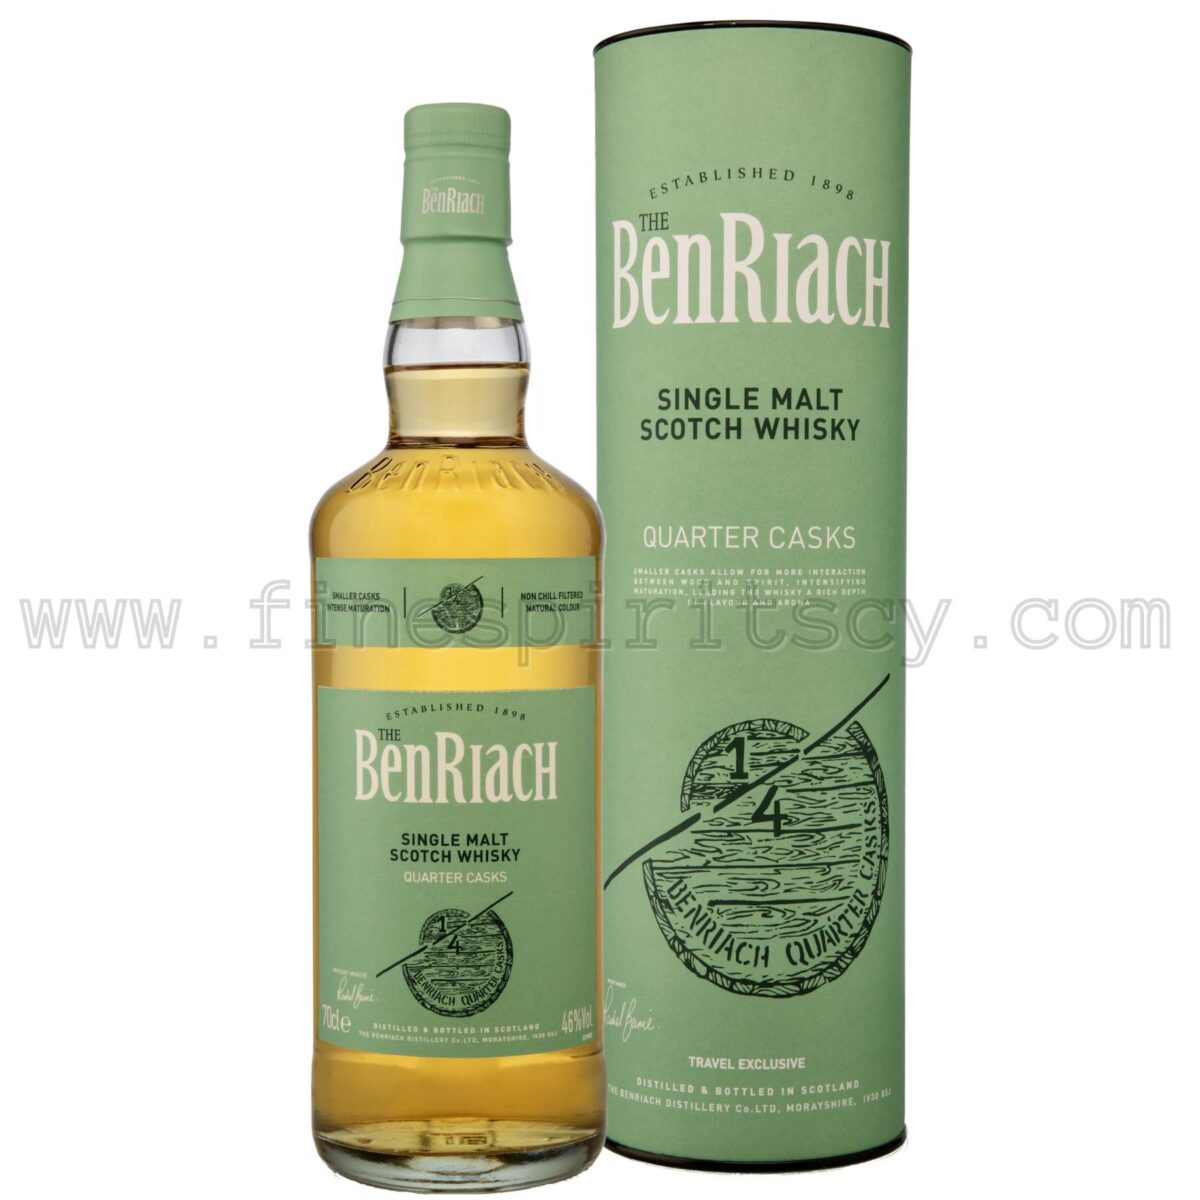 Benriach Quarter Casks CY Price Whisky Whiskey 70cl Cyprus Online 700ml 0.7L